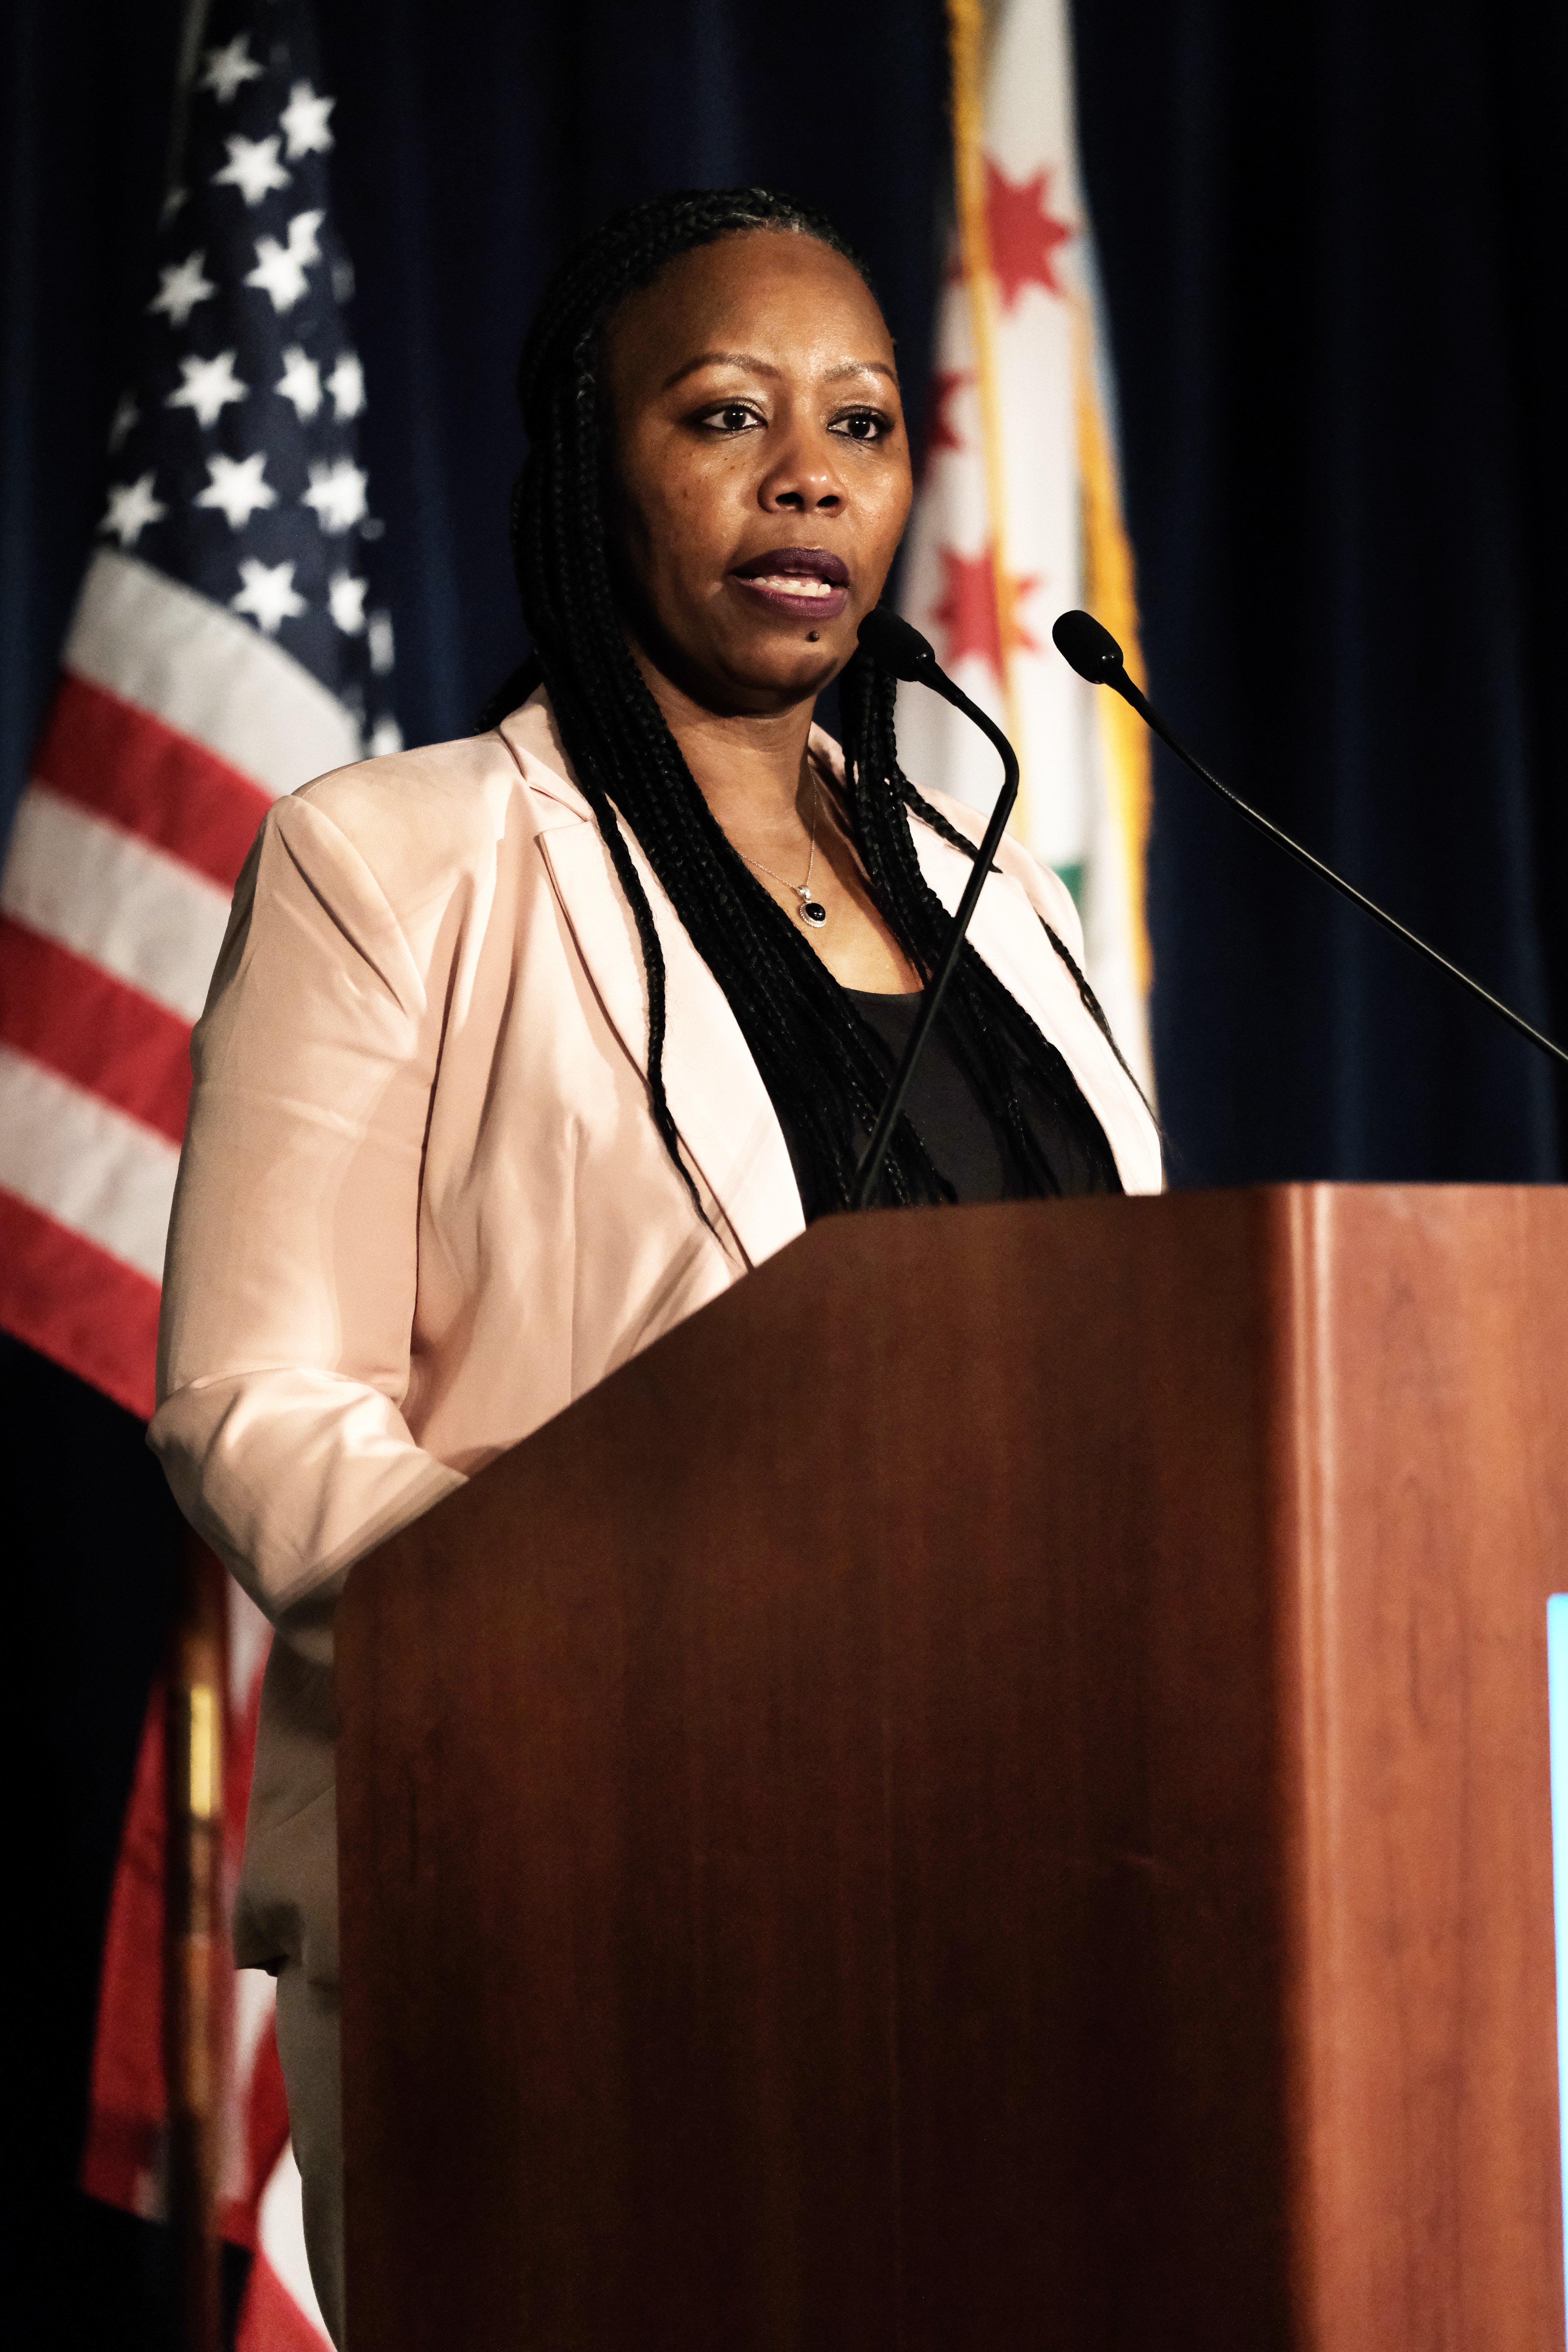 Cook County Chief of Staff Lanetta Haynes Turner